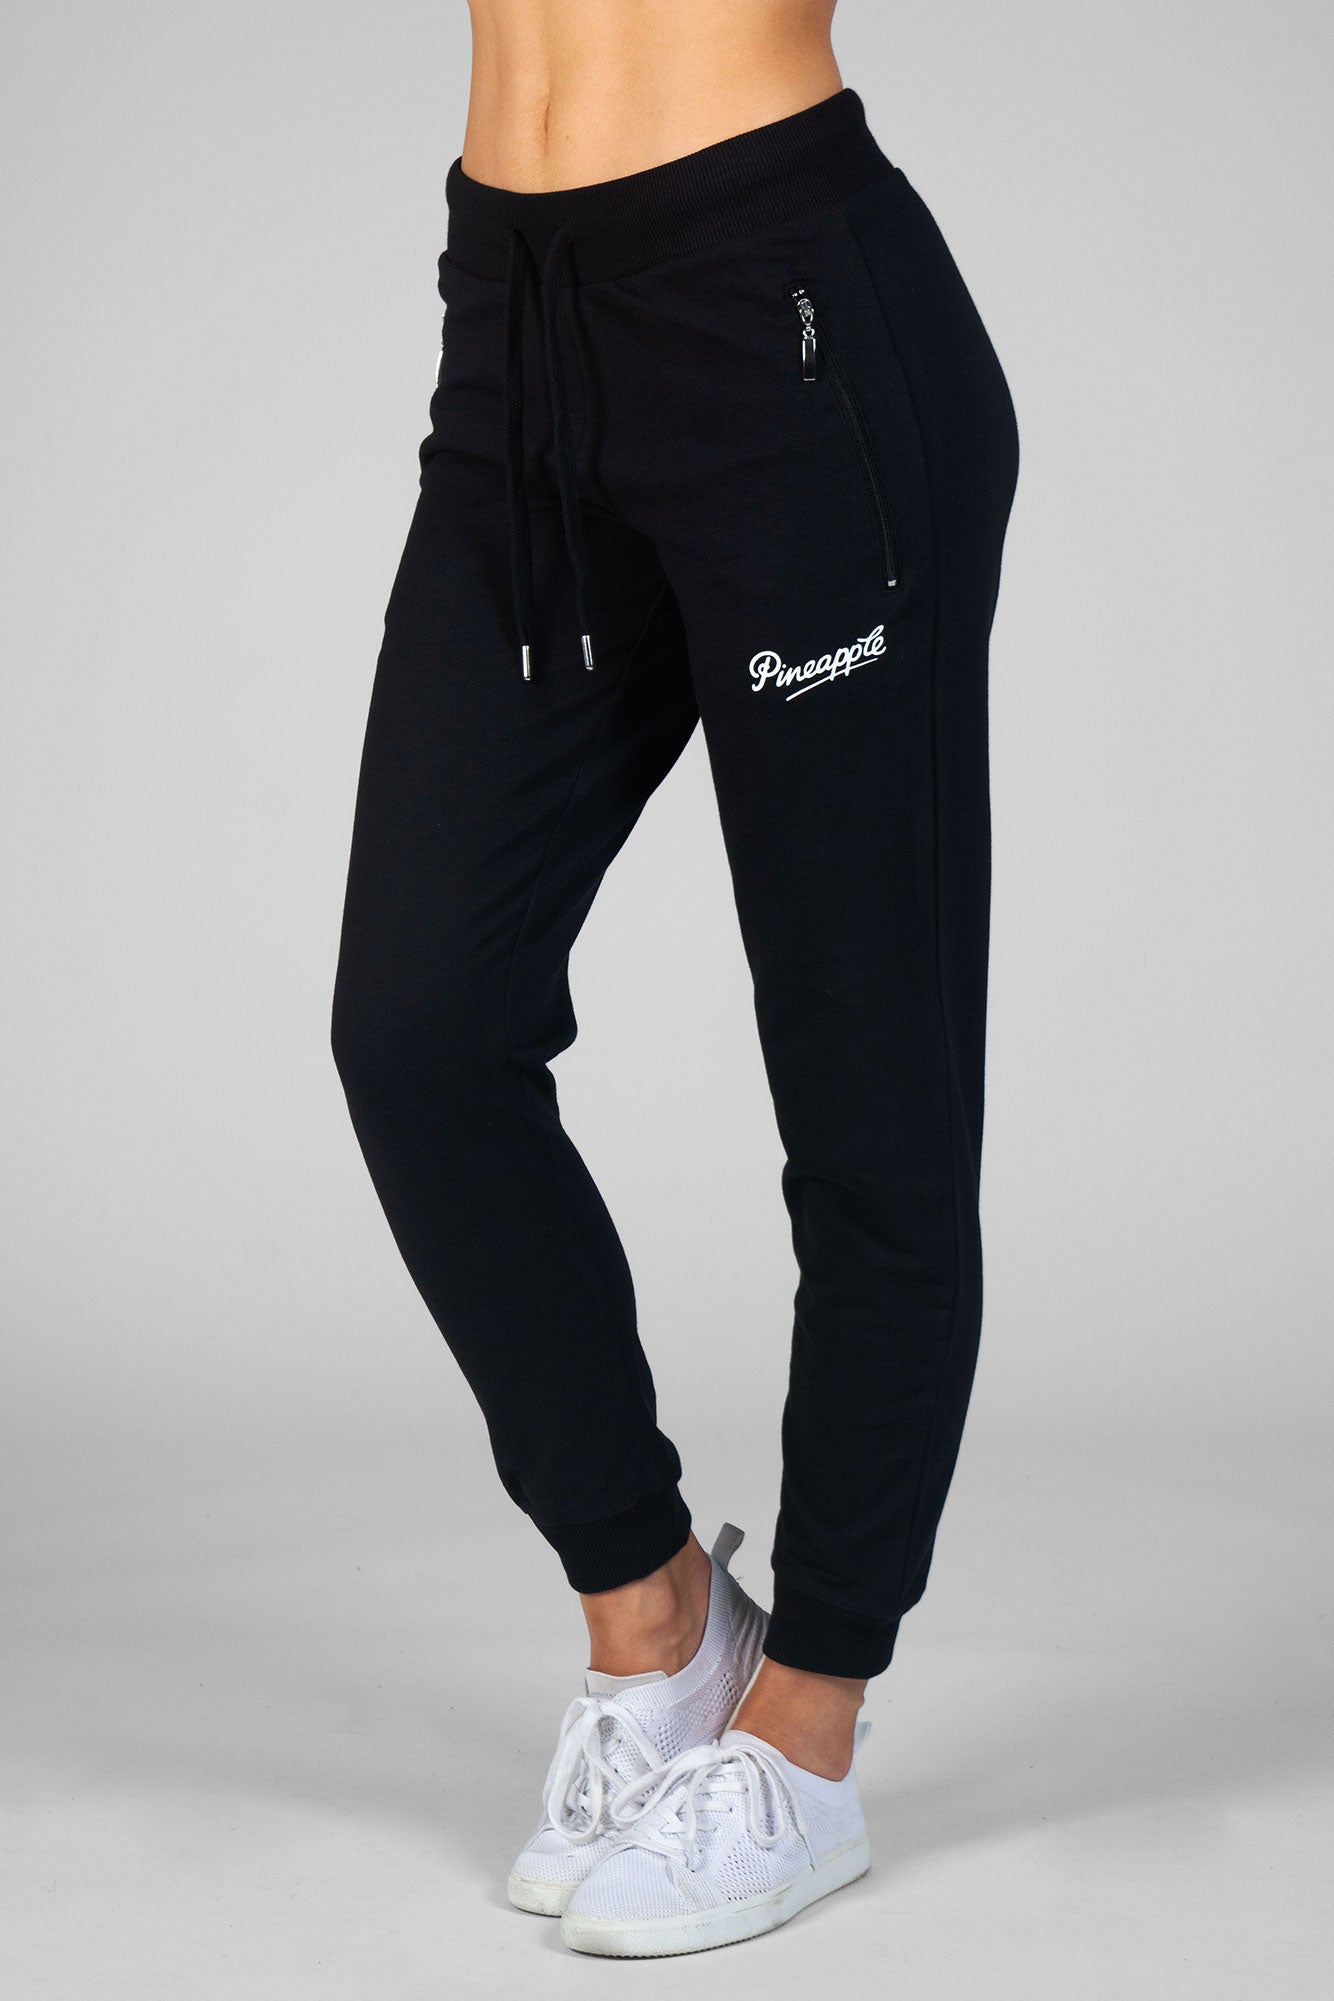 PINEAPPLE Dancewear Womens Double Band Joggers Track Pants Jogging Bottoms  Navy - Small UK 8/10